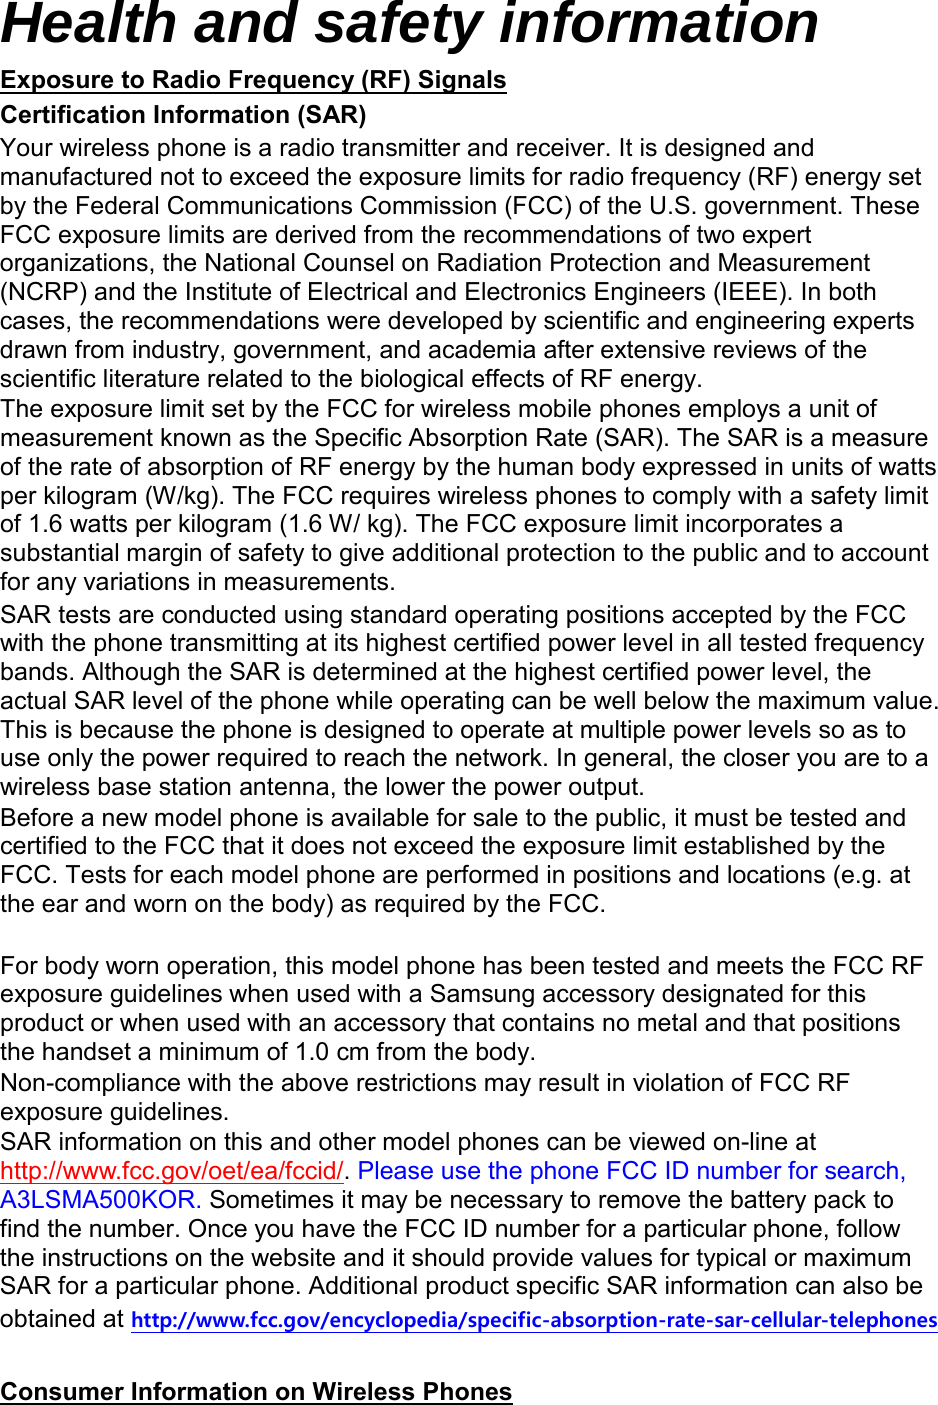 Health and safety information Exposure to Radio Frequency (RF) Signals Certification Information (SAR) Your wireless phone is a radio transmitter and receiver. It is designed and manufactured not to exceed the exposure limits for radio frequency (RF) energy set by the Federal Communications Commission (FCC) of the U.S. government. These FCC exposure limits are derived from the recommendations of two expert organizations, the National Counsel on Radiation Protection and Measurement (NCRP) and the Institute of Electrical and Electronics Engineers (IEEE). In both cases, the recommendations were developed by scientific and engineering experts drawn from industry, government, and academia after extensive reviews of the scientific literature related to the biological effects of RF energy. The exposure limit set by the FCC for wireless mobile phones employs a unit of measurement known as the Specific Absorption Rate (SAR). The SAR is a measure of the rate of absorption of RF energy by the human body expressed in units of watts per kilogram (W/kg). The FCC requires wireless phones to comply with a safety limit of 1.6 watts per kilogram (1.6 W/ kg). The FCC exposure limit incorporates a substantial margin of safety to give additional protection to the public and to account for any variations in measurements. SAR tests are conducted using standard operating positions accepted by the FCC with the phone transmitting at its highest certified power level in all tested frequency bands. Although the SAR is determined at the highest certified power level, the actual SAR level of the phone while operating can be well below the maximum value. This is because the phone is designed to operate at multiple power levels so as to use only the power required to reach the network. In general, the closer you are to a wireless base station antenna, the lower the power output. Before a new model phone is available for sale to the public, it must be tested and certified to the FCC that it does not exceed the exposure limit established by the FCC. Tests for each model phone are performed in positions and locations (e.g. at the ear and worn on the body) as required by the FCC.      For body worn operation, this model phone has been tested and meets the FCC RF exposure guidelines when used with a Samsung accessory designated for this product or when used with an accessory that contains no metal and that positions the handset a minimum of 1.0 cm from the body.   Non-compliance with the above restrictions may result in violation of FCC RF exposure guidelines. SAR information on this and other model phones can be viewed on-line at http://www.fcc.gov/oet/ea/fccid/. Please use the phone FCC ID number for search, A3LSMA500KOR. Sometimes it may be necessary to remove the battery pack to find the number. Once you have the FCC ID number for a particular phone, follow the instructions on the website and it should provide values for typical or maximum SAR for a particular phone. Additional product specific SAR information can also be obtained at http://www.fcc.gov/encyclopedia/specific-absorption-rate-sar-cellular-telephones  Consumer Information on Wireless Phones 